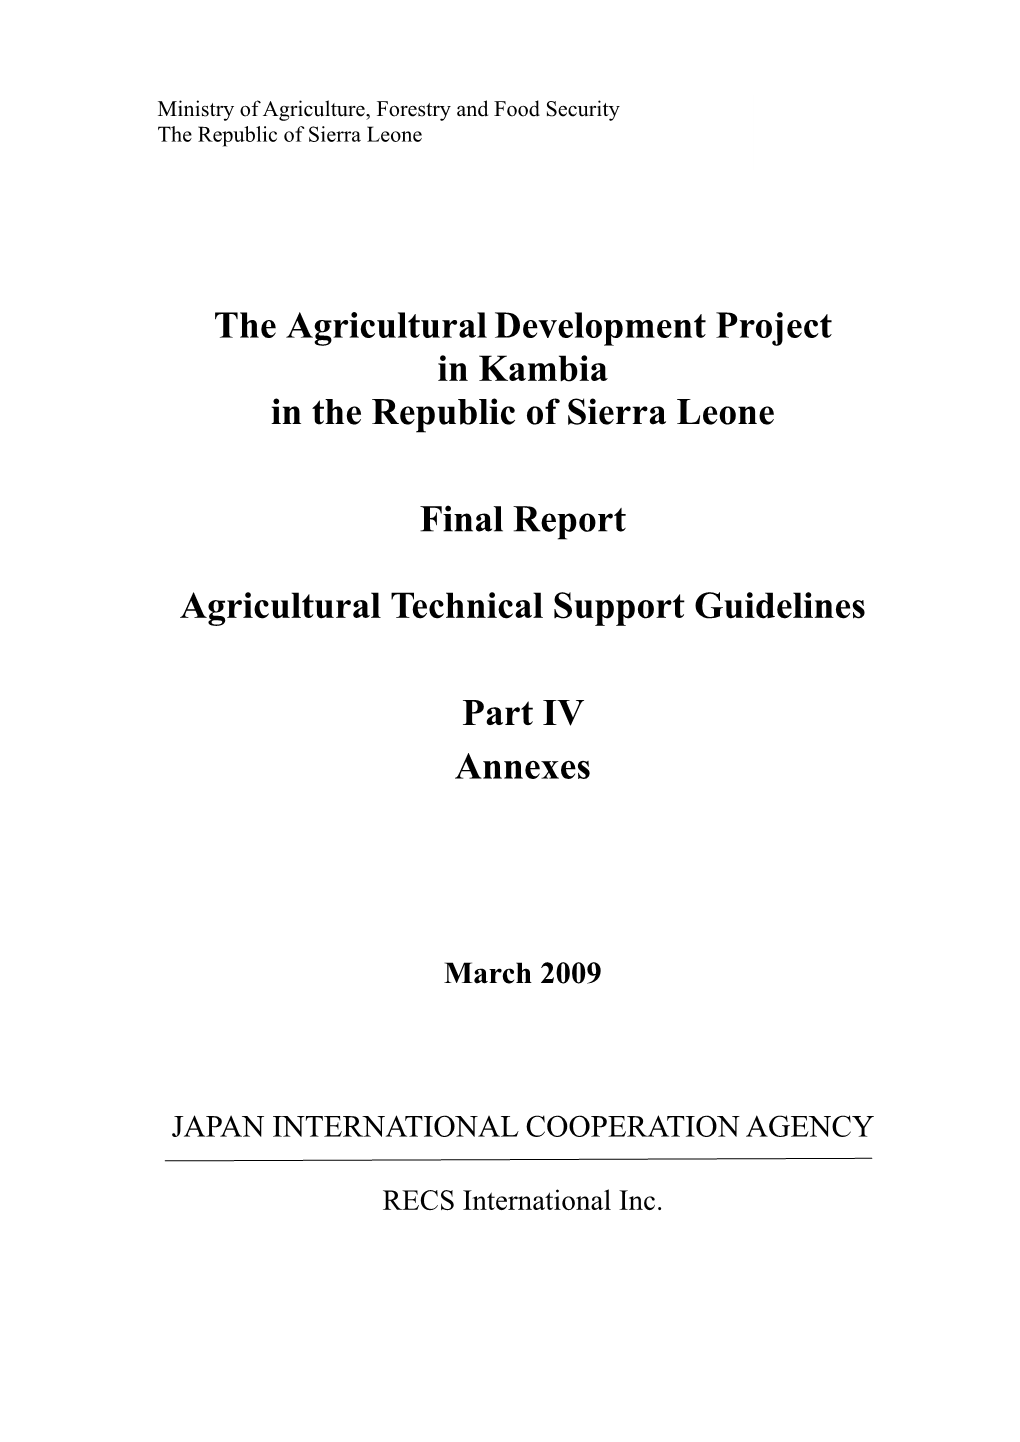 The Agricultural Development Project in Kambia in the Republic of Sierra Leone